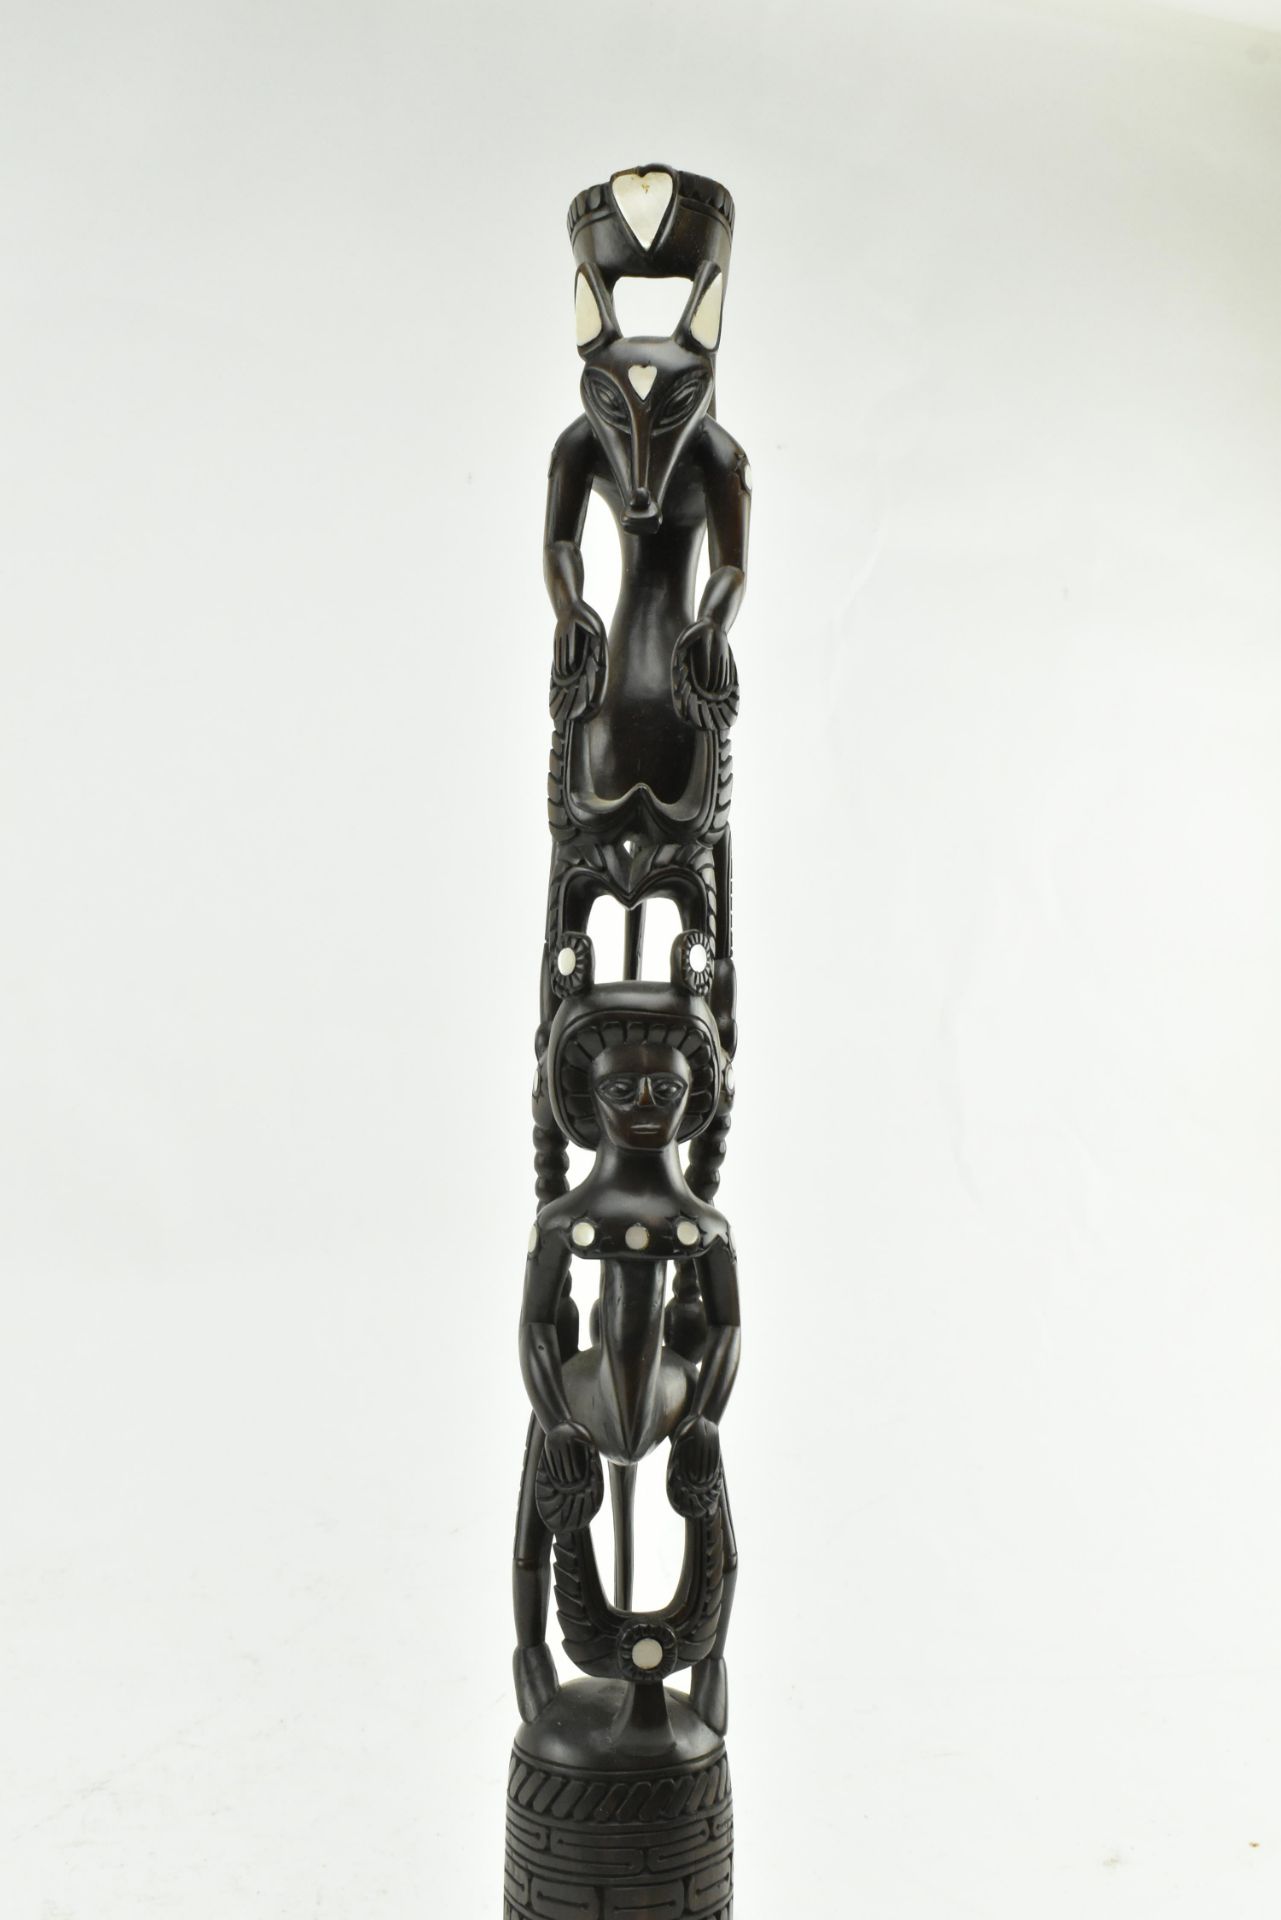 POLYNESIAN HARDWOOD & MOTHER OF PEARL TOTEM STATUE & REST - Image 6 of 6